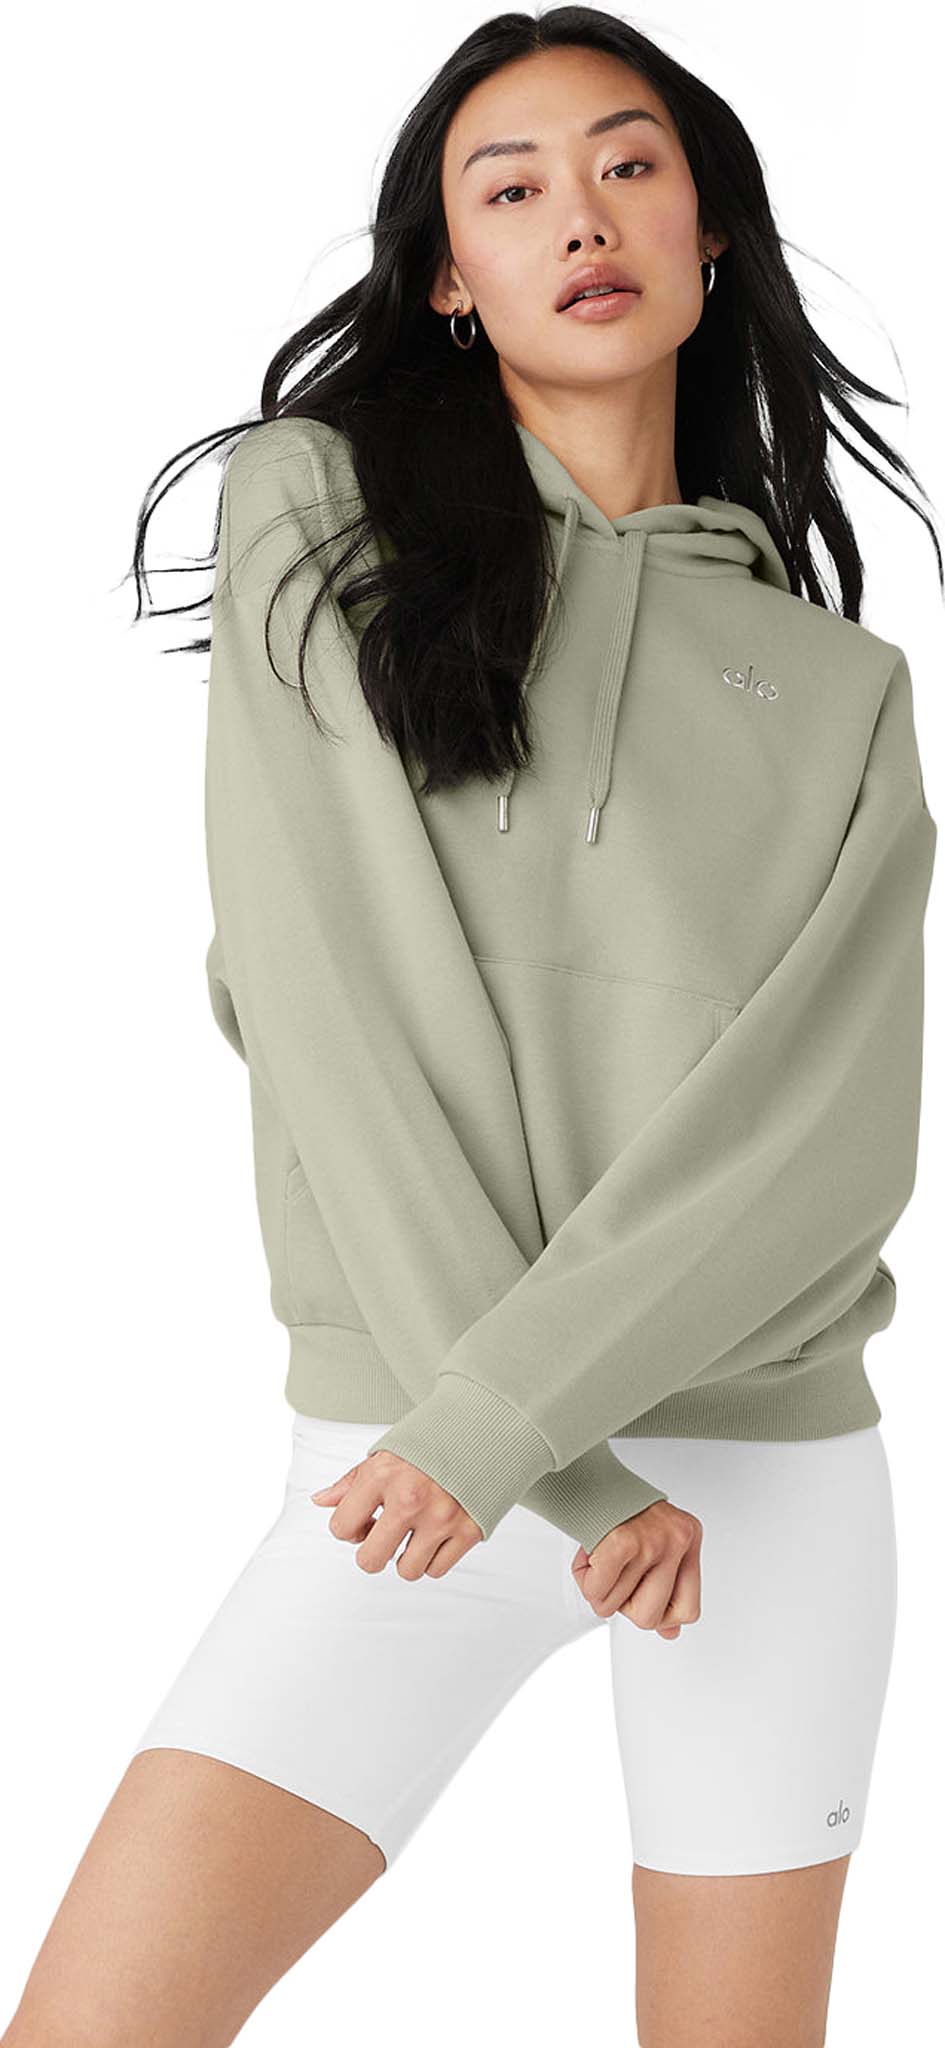 Alo Yoga Accolade Hoodie in Natural